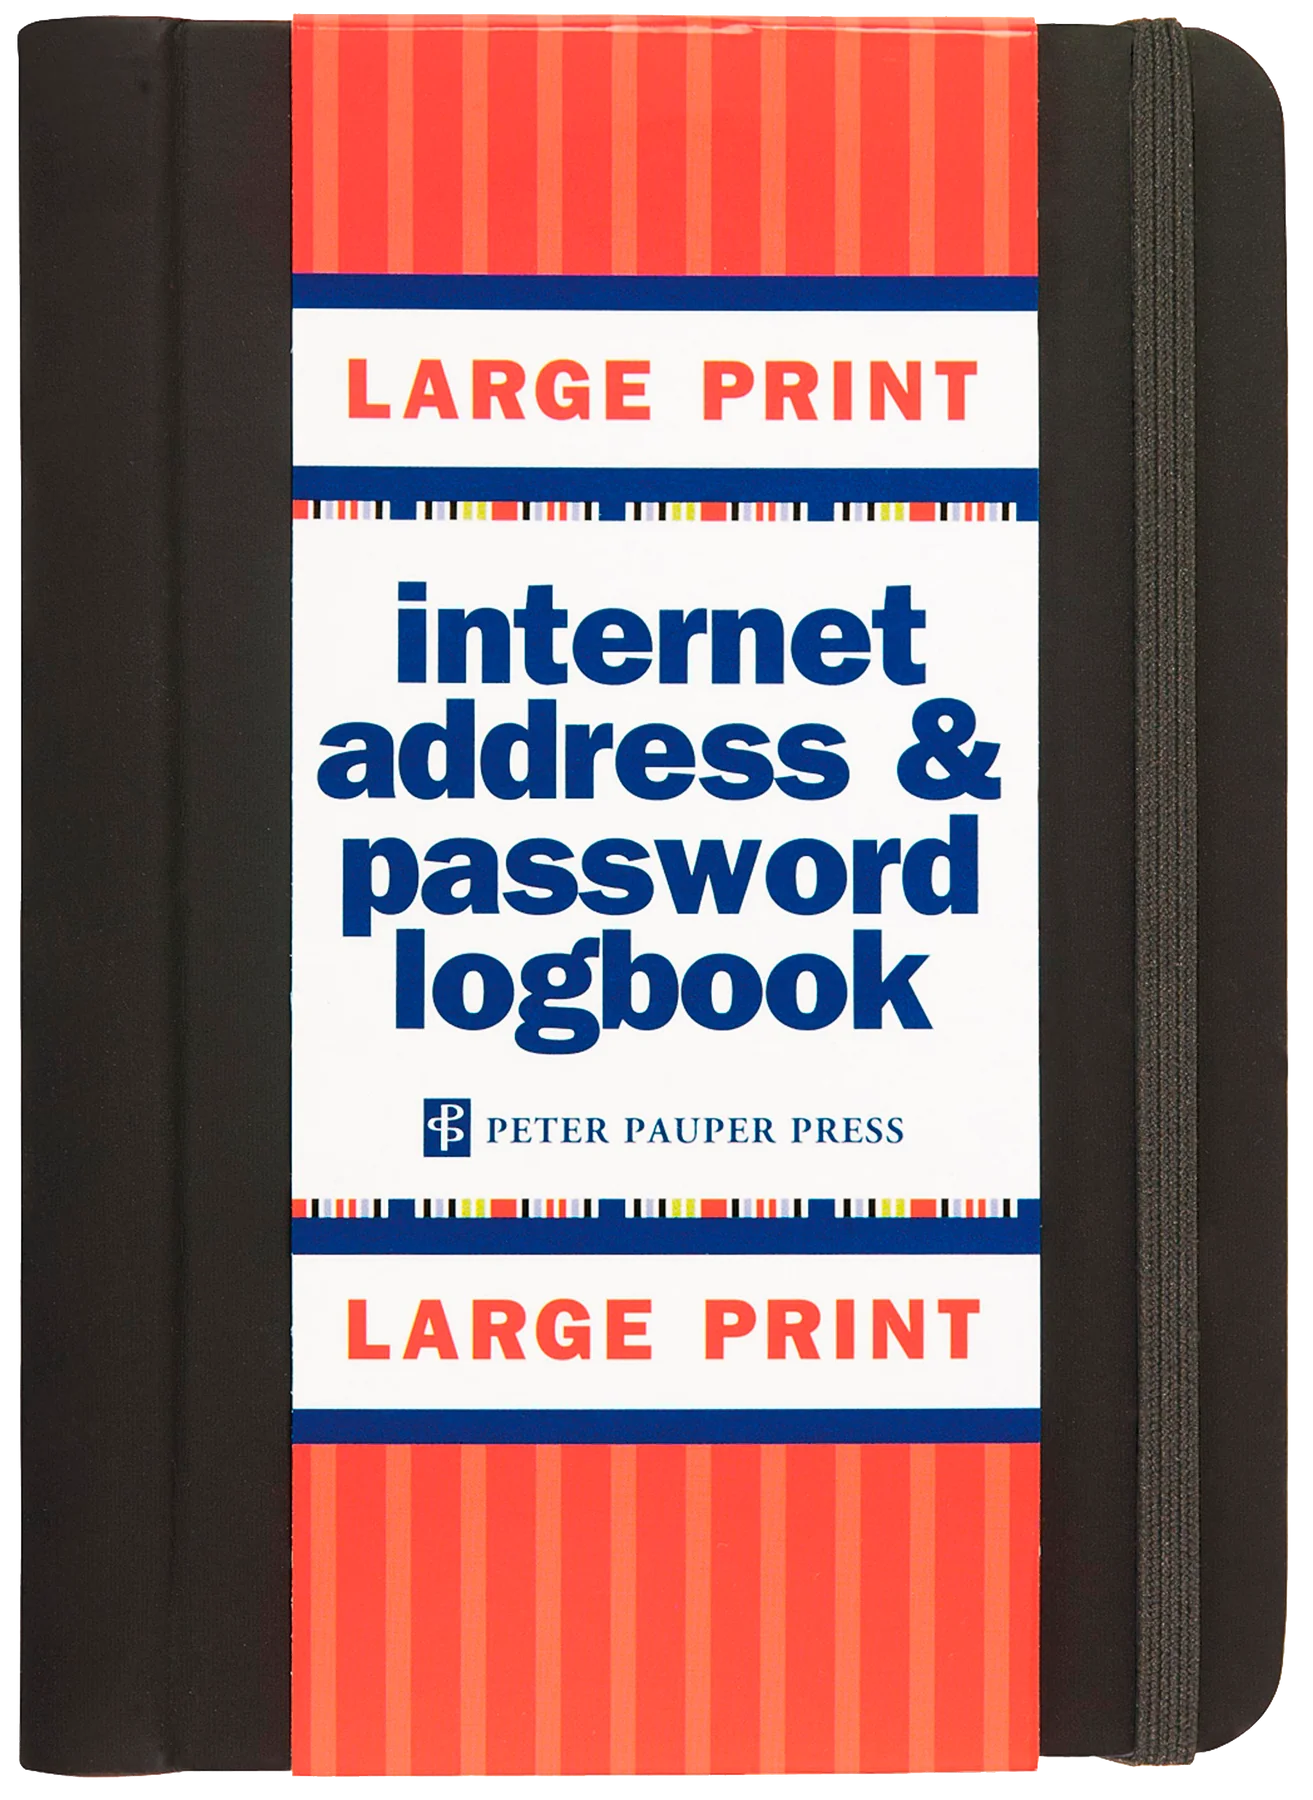 dark brown book with a light red vertical band that says "large print internet access & password logbook"